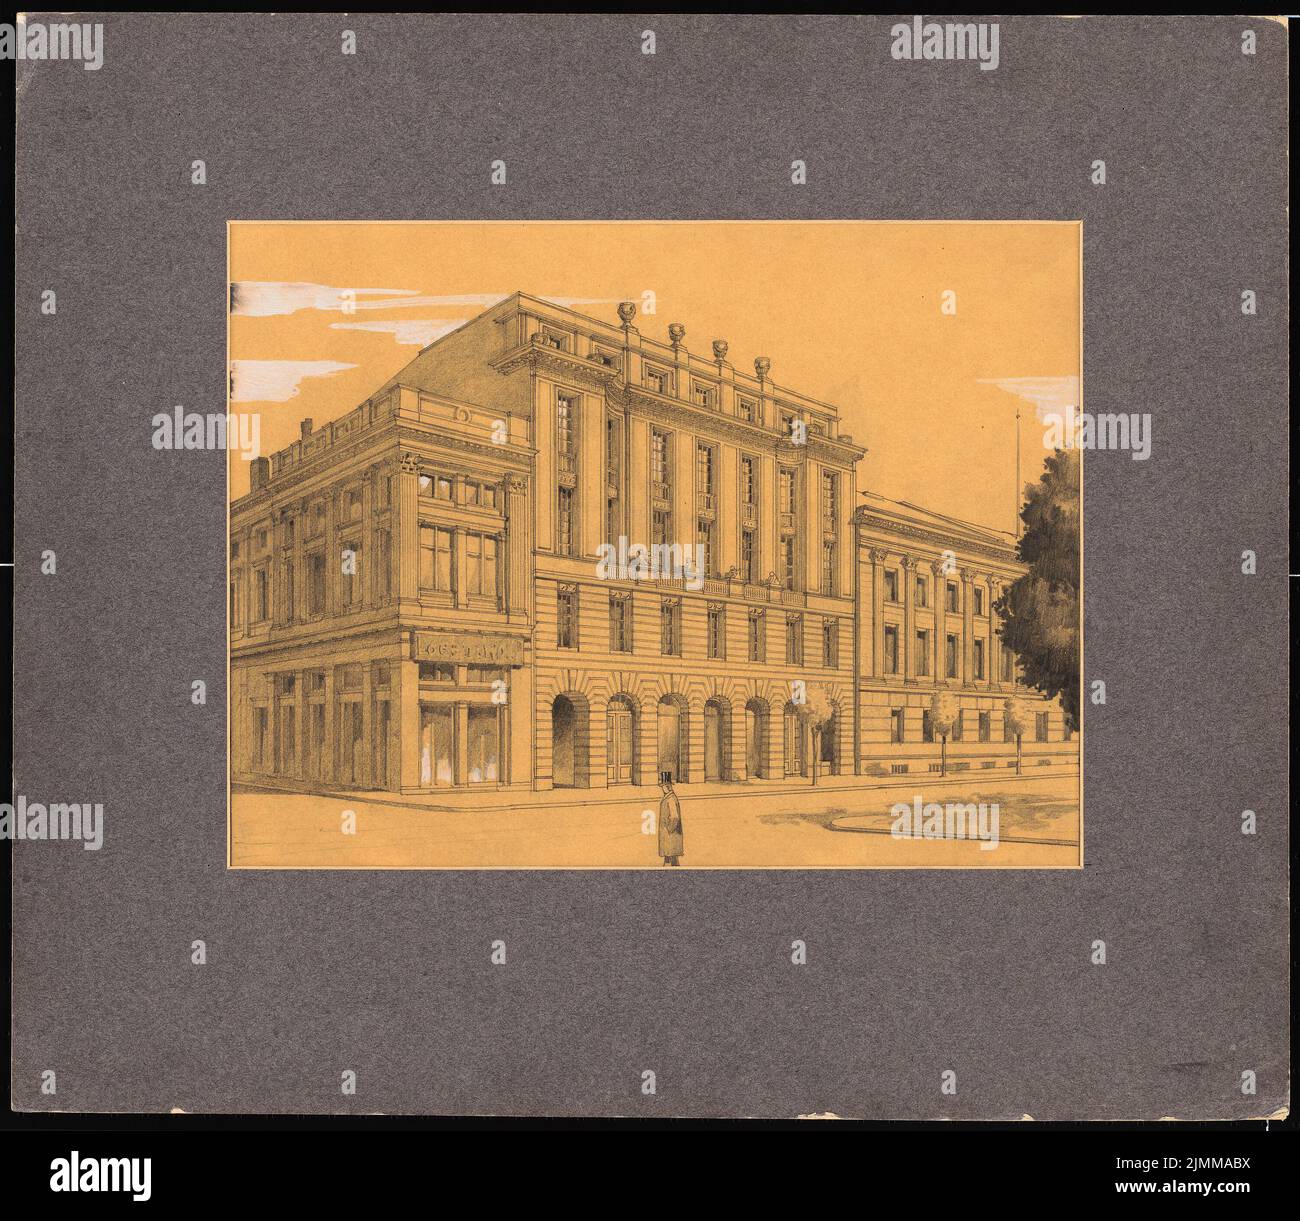 Messel Alfred (1853-1909), Schulte, Berlin (1905), Perspective View, Pencil White Happed Cardboard, TU UB Plan collection Inv. No. 12343 Stock Photo